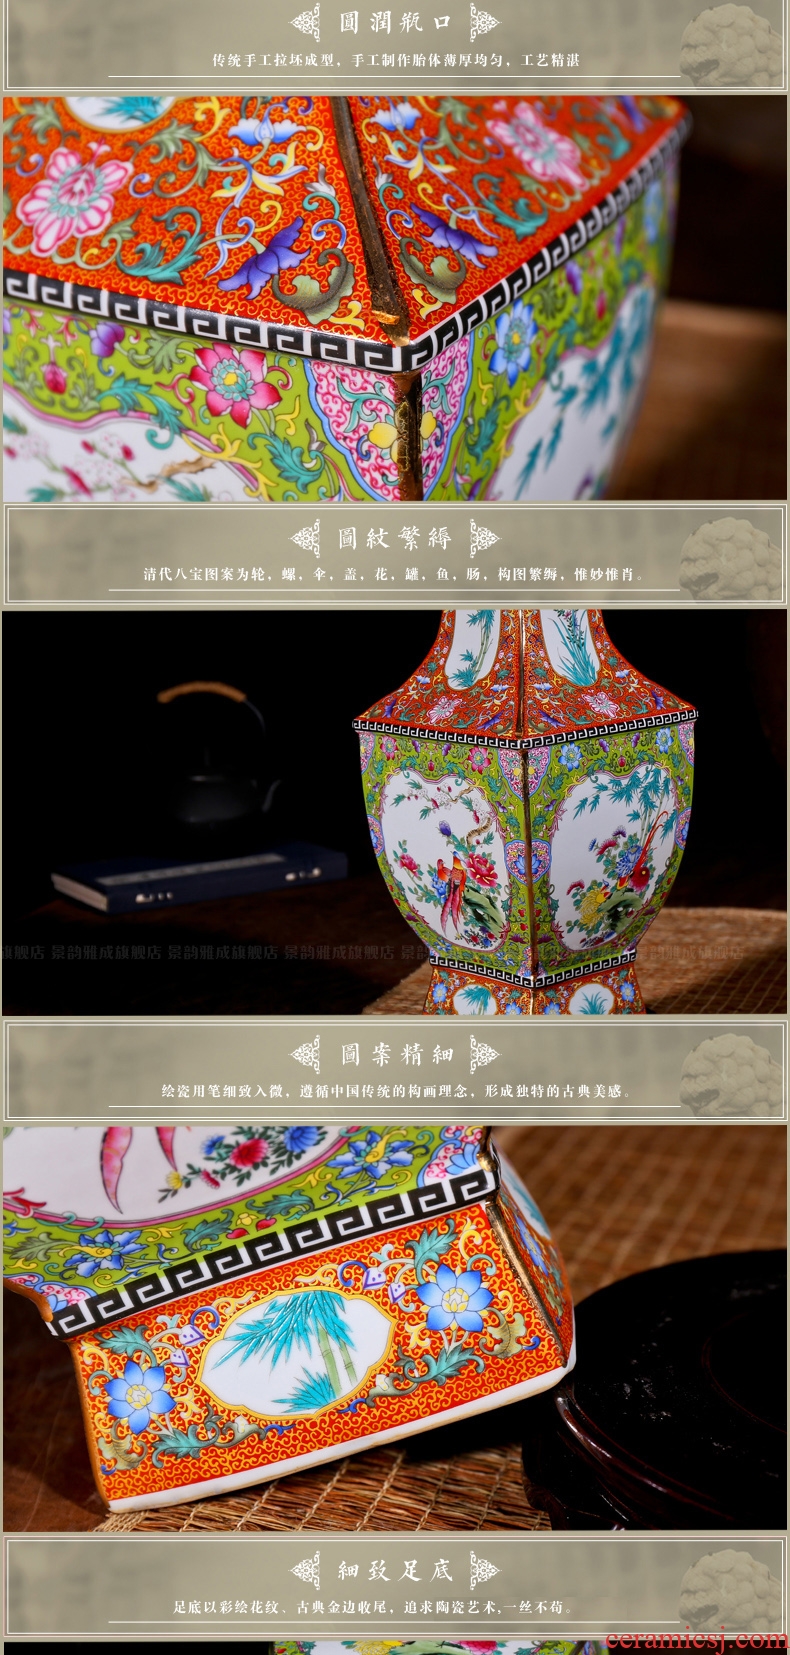 Jingdezhen ceramic antique vase guanyao fashion classic painting of flowers and furnishing articles housewarming flower arranging ground sitting room porch